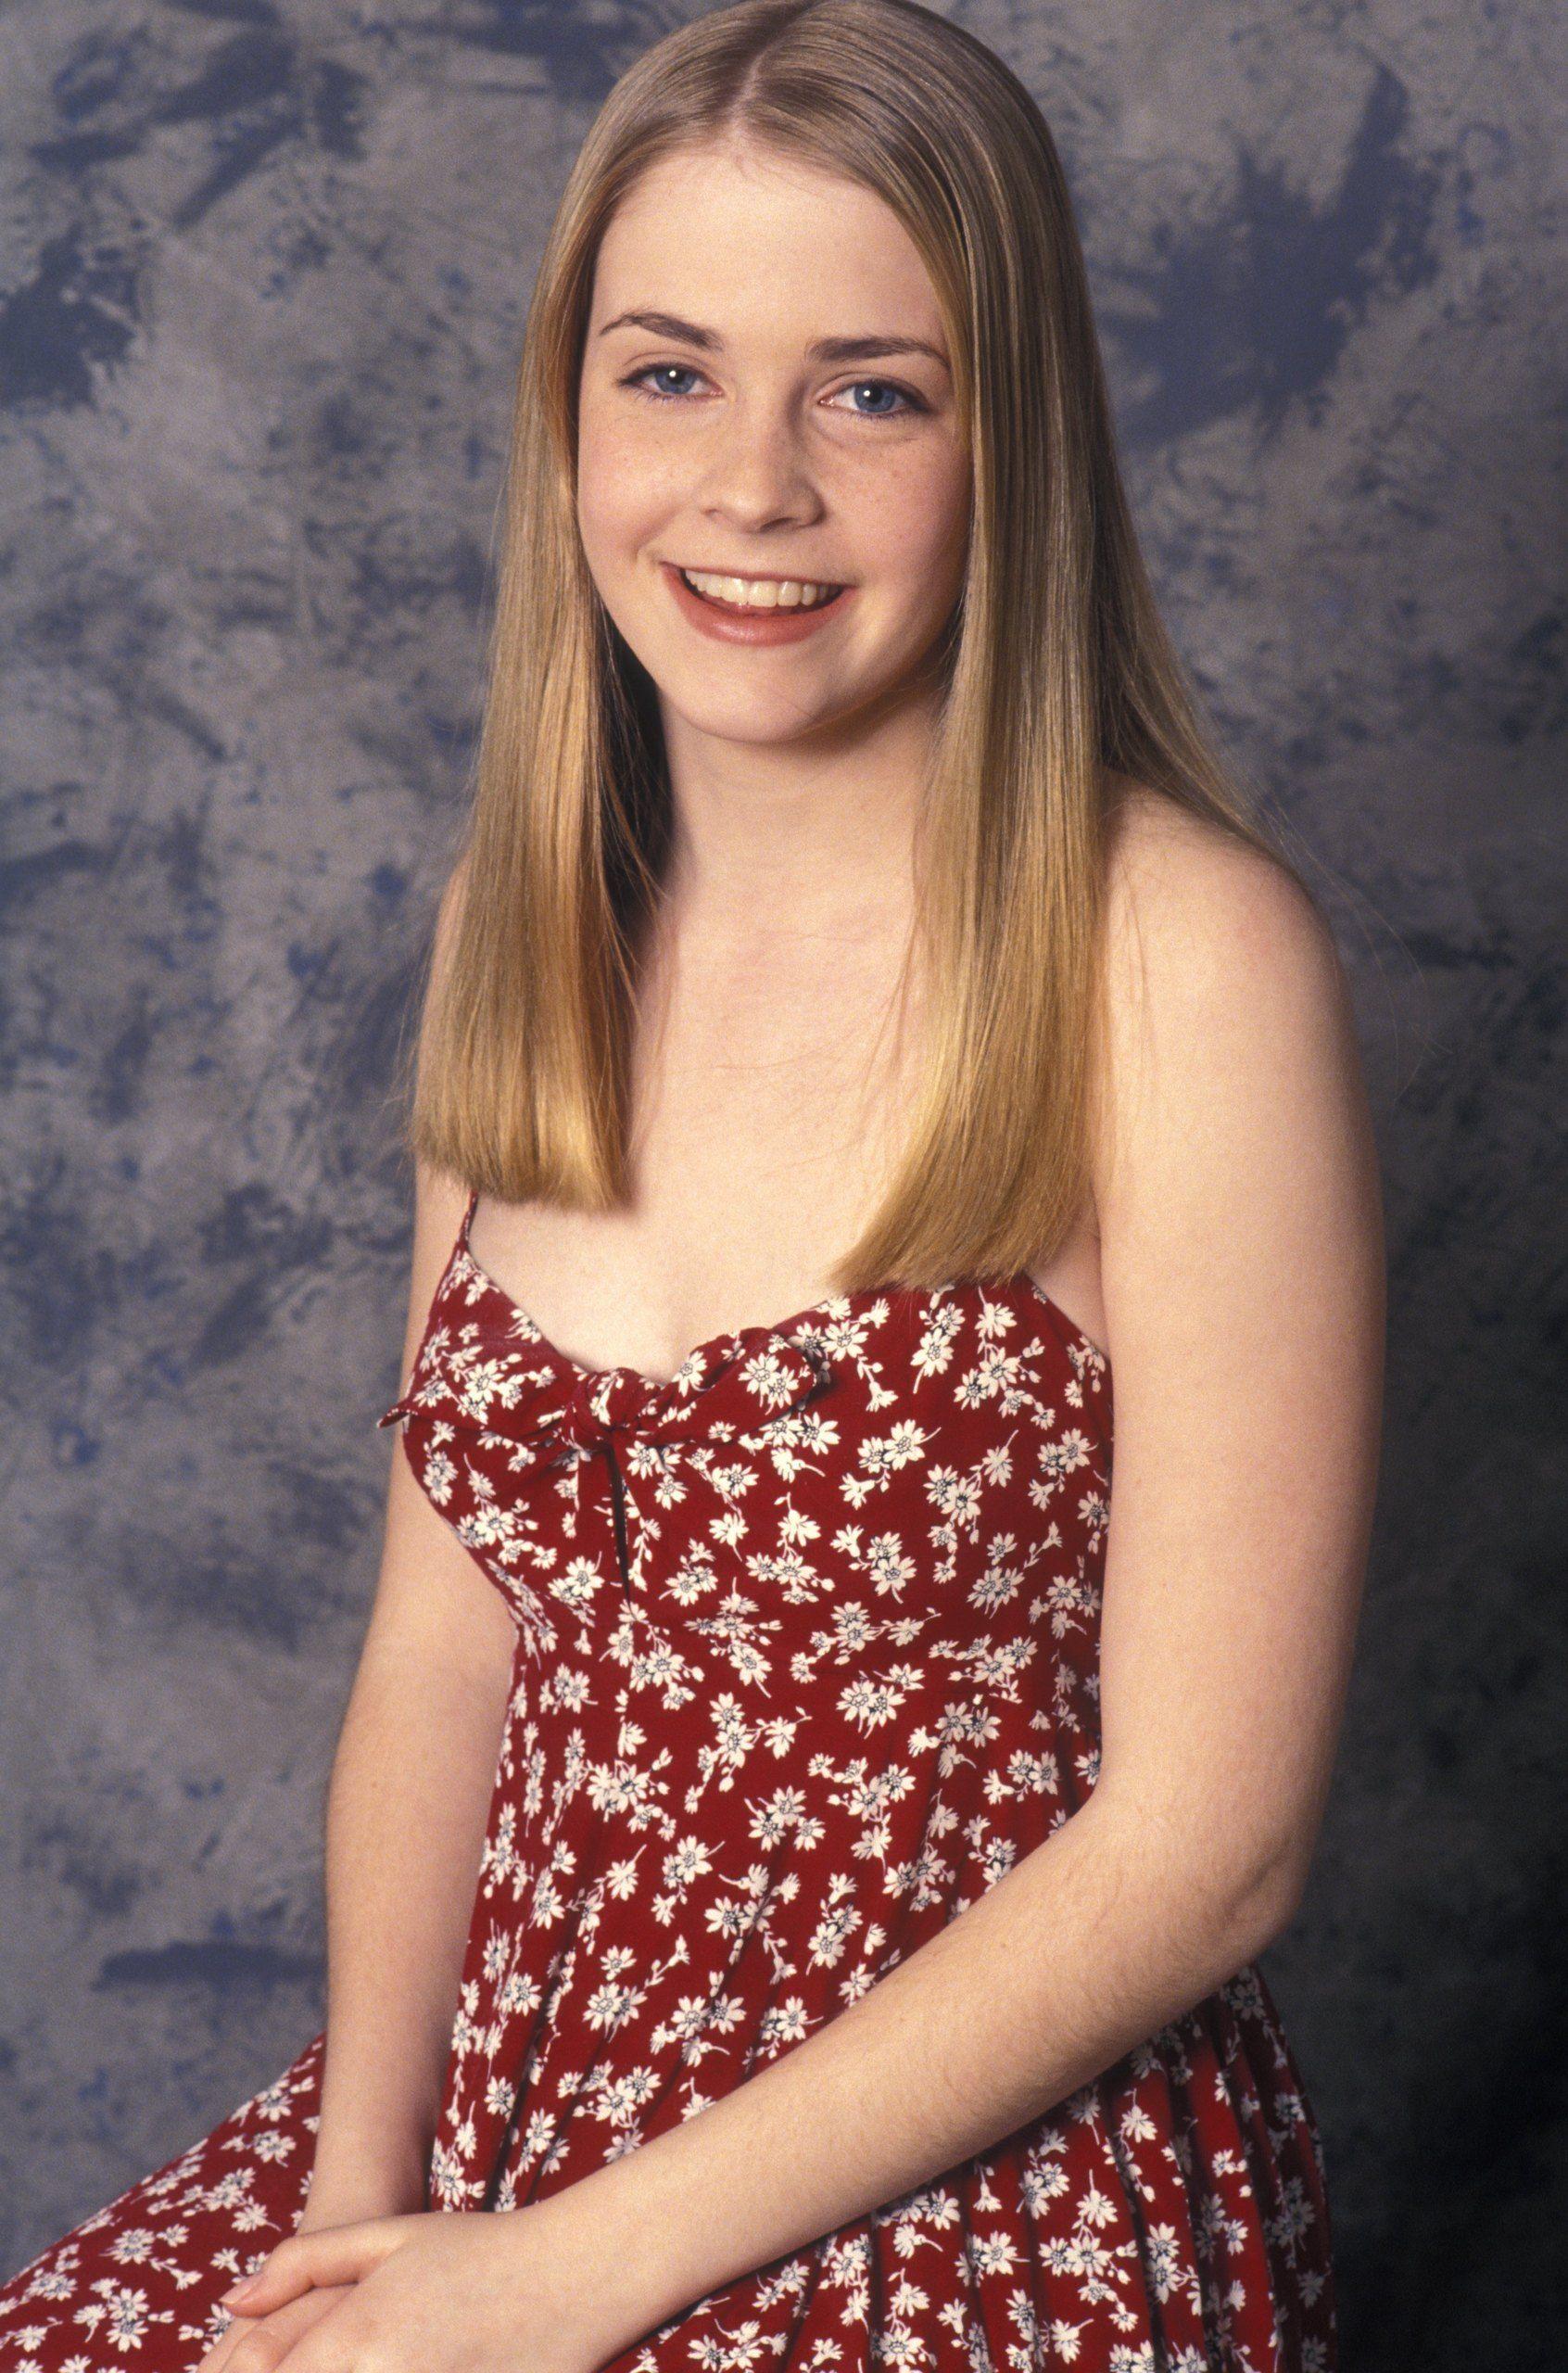 Clarissa Explains It All image Clarissa HD wallpaper and background photo. Melissa joan hart, Cute dress outfits, Celebrities female